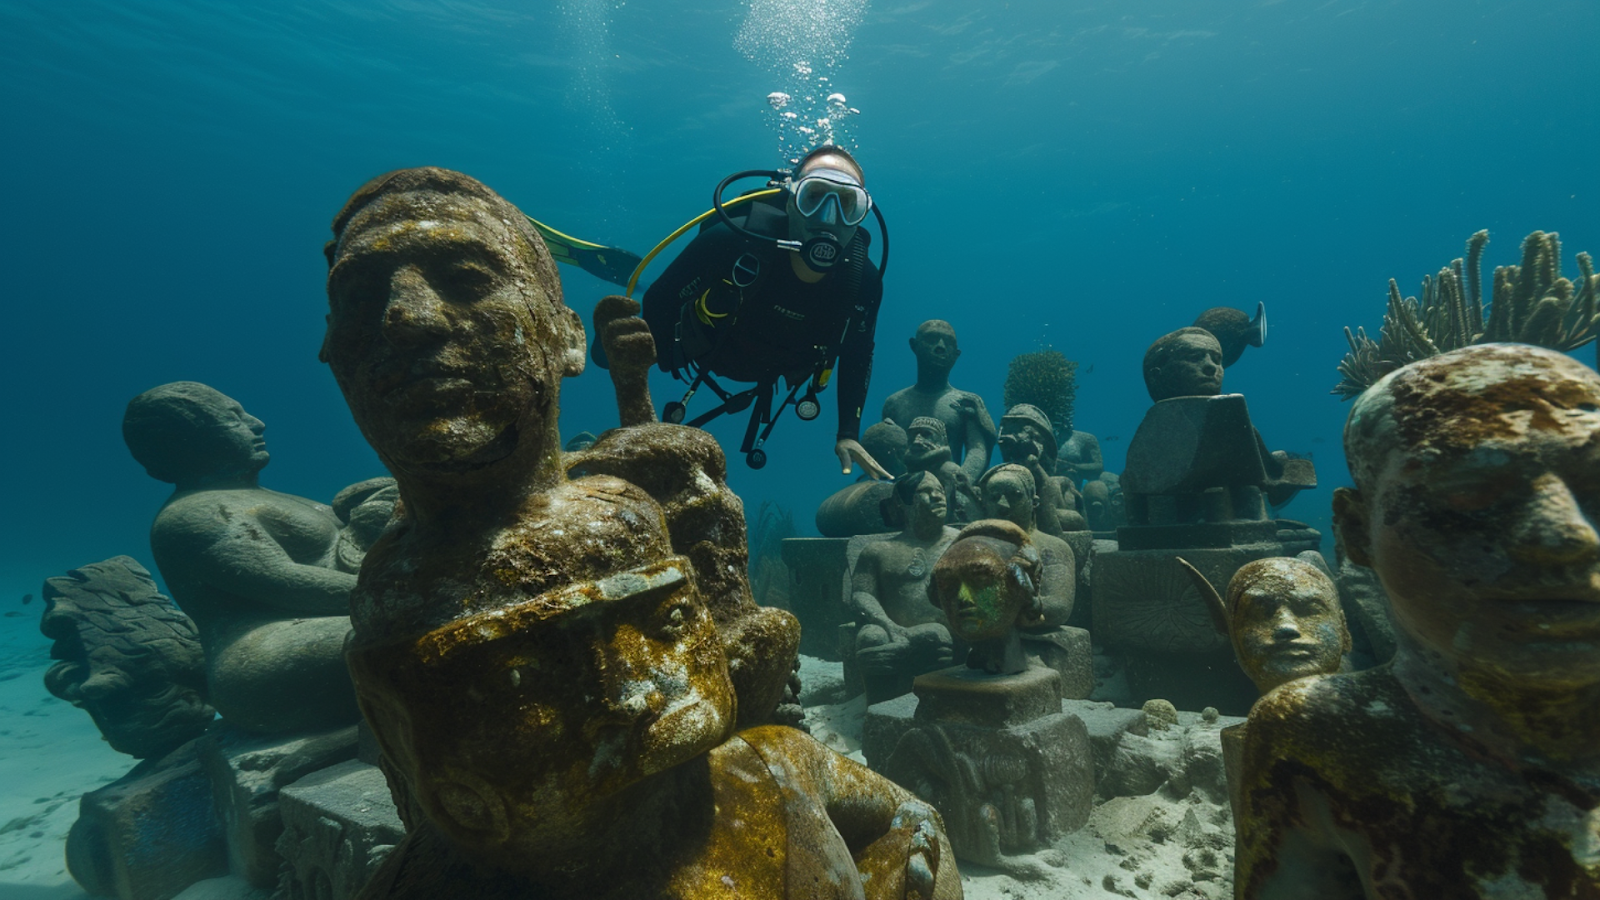 A person exploring Cancun’s underwater museum